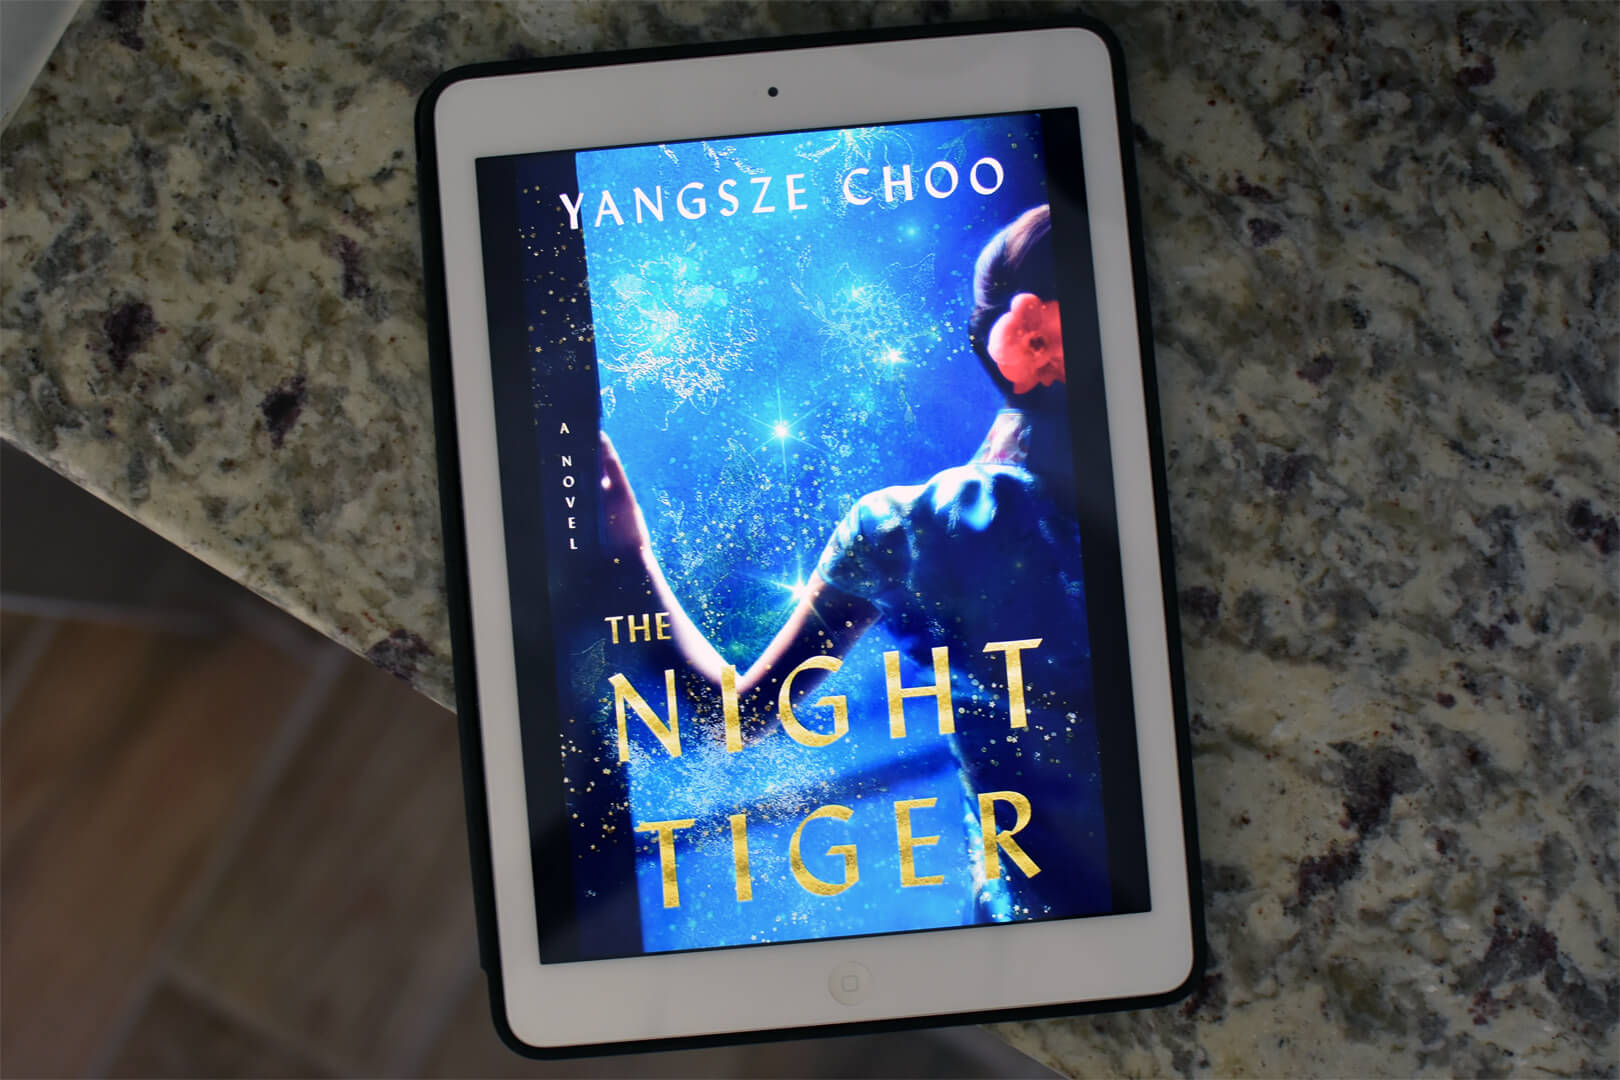 Review: The Night Tiger by Yangsze Choo